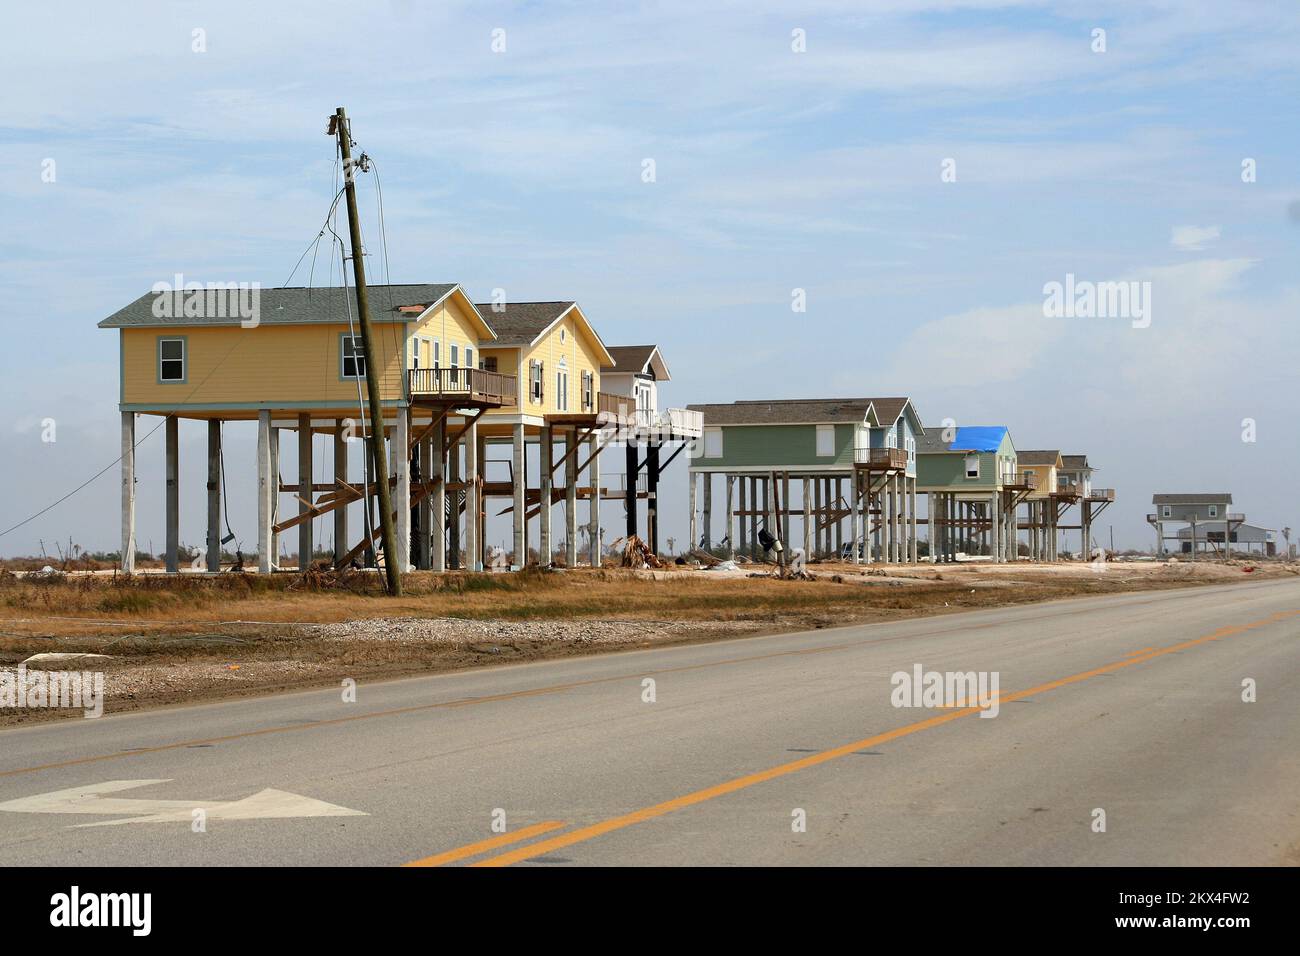 Hurricane/Tropical Storm - Bolivar Peninsula, Texas, October 15, 2008   Elevated houses along Highway 87 survived Hurricane Ike's twenty-foot storm surge with minimal damage. Homes that were not elevated in this area no longer exist. Ike came in one month ago from Galveston Bay, just across the highway to the right. Texas Hurricane Ike. Photographs Relating to Disasters and Emergency Management Programs, Activities, and Officials Stock Photo